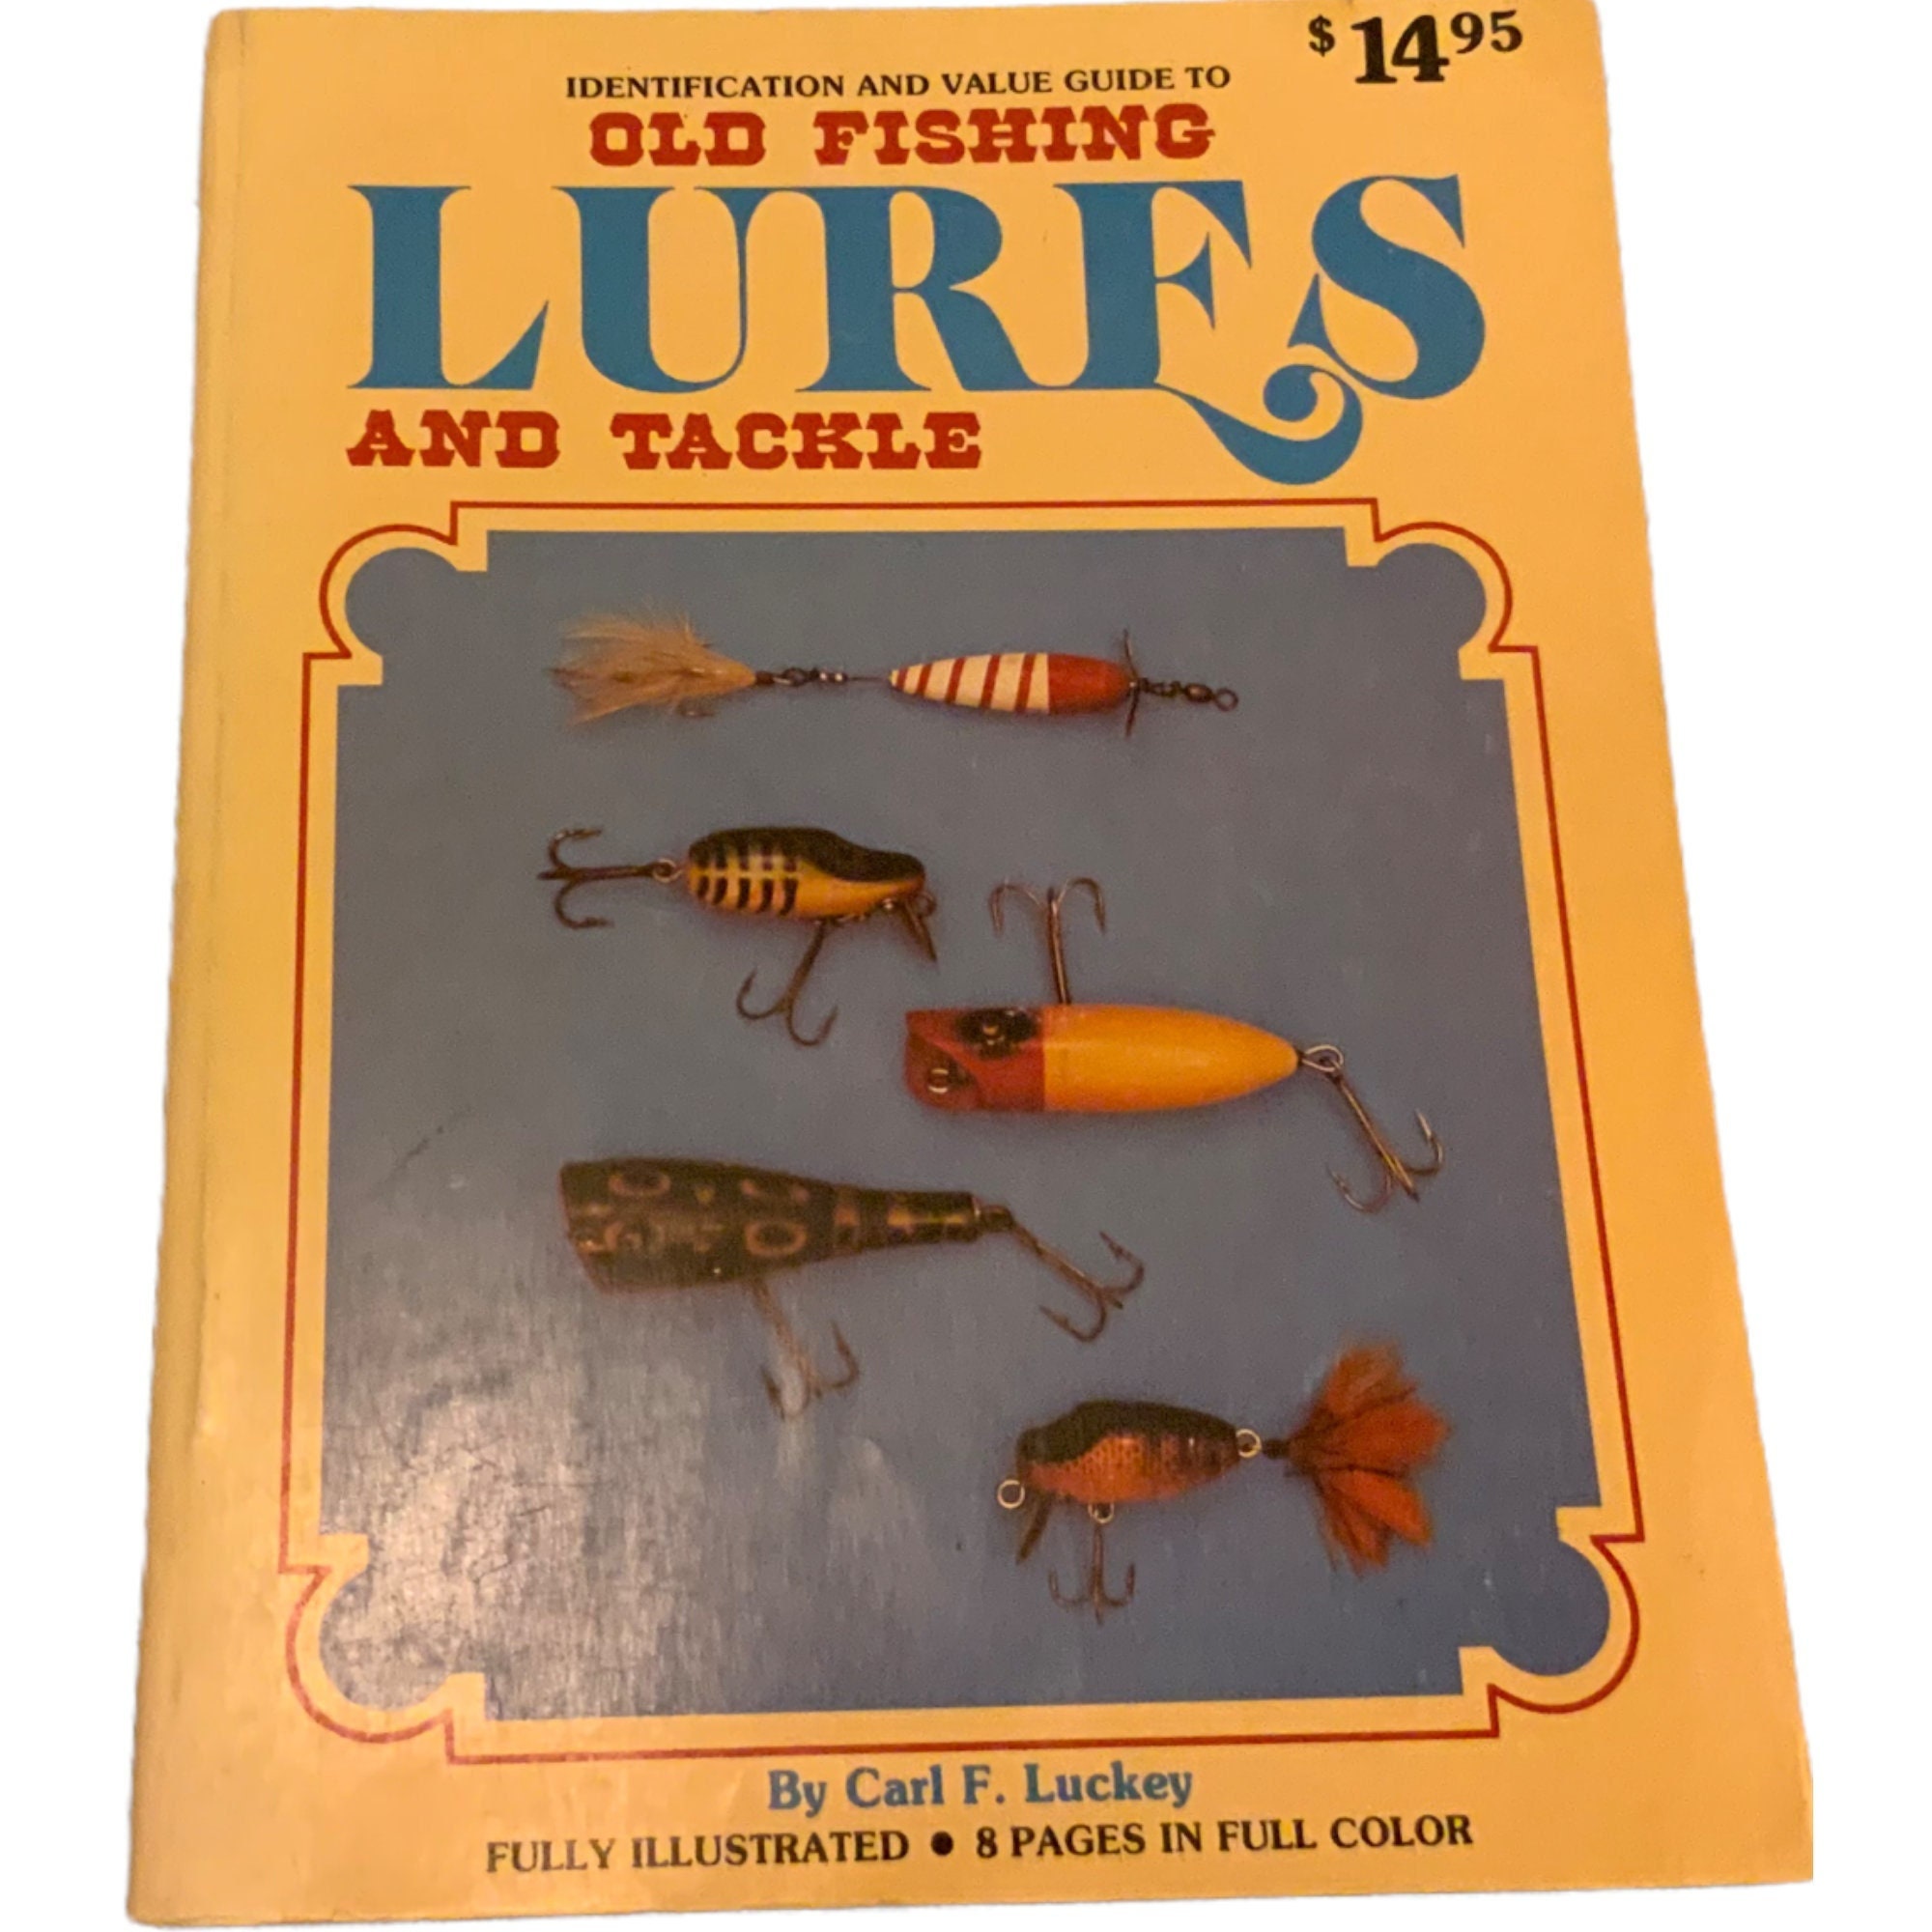 Vintage Old Fashioned Fishing Lures and Tackle Price Guide 1980